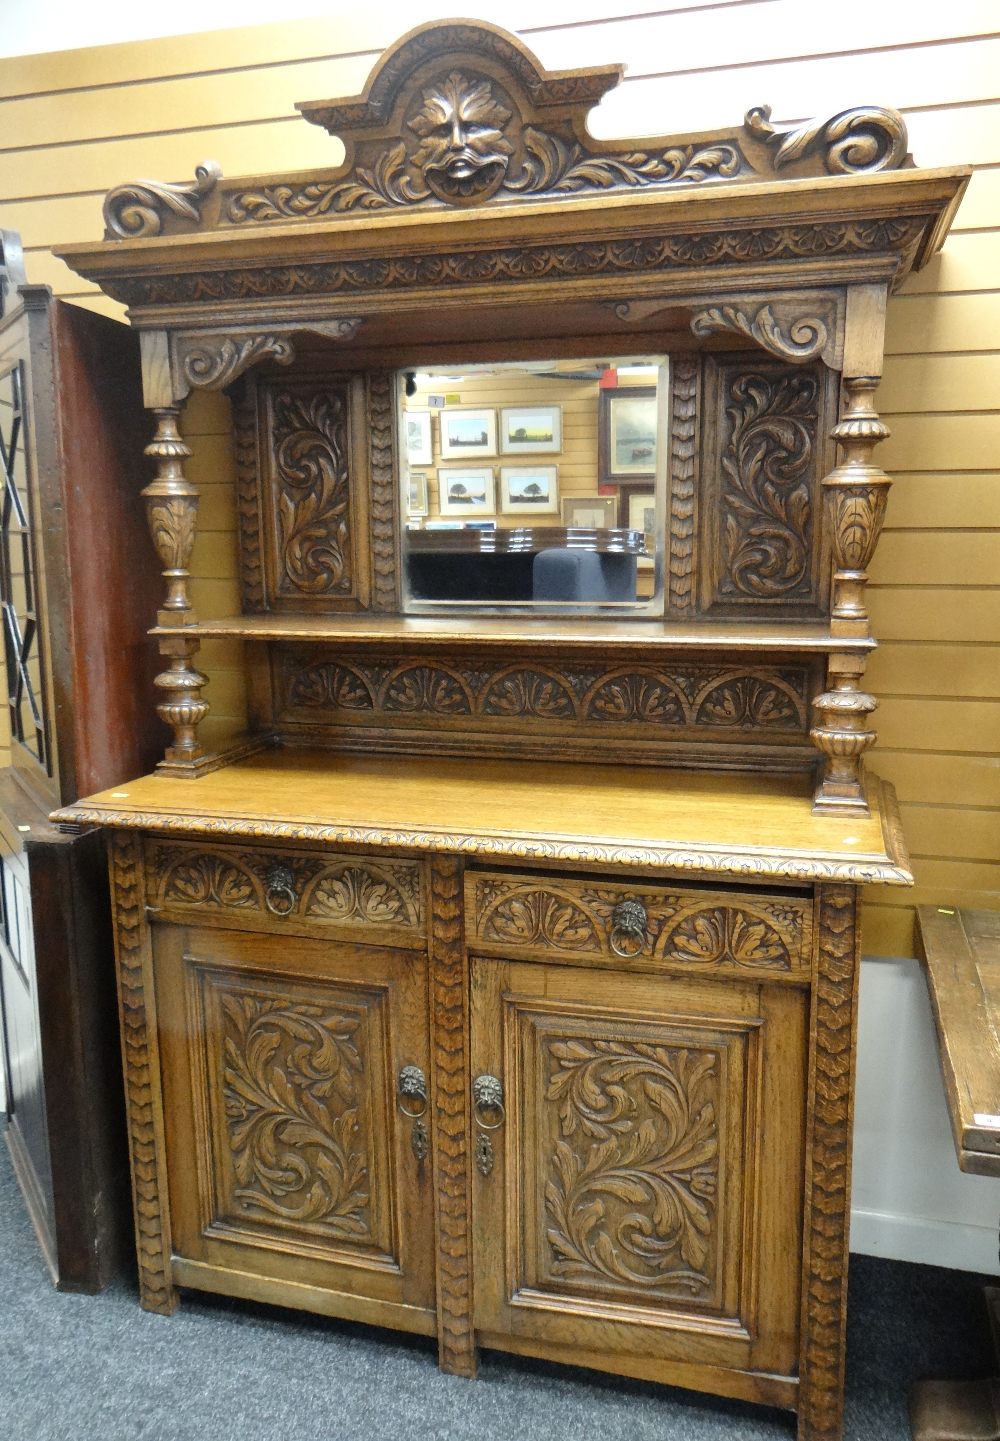 CONTINENTAL CARVED OAK MIRROR BACK SIDEBOARD, Renaissance revival style, 217 x 145 x 60cms